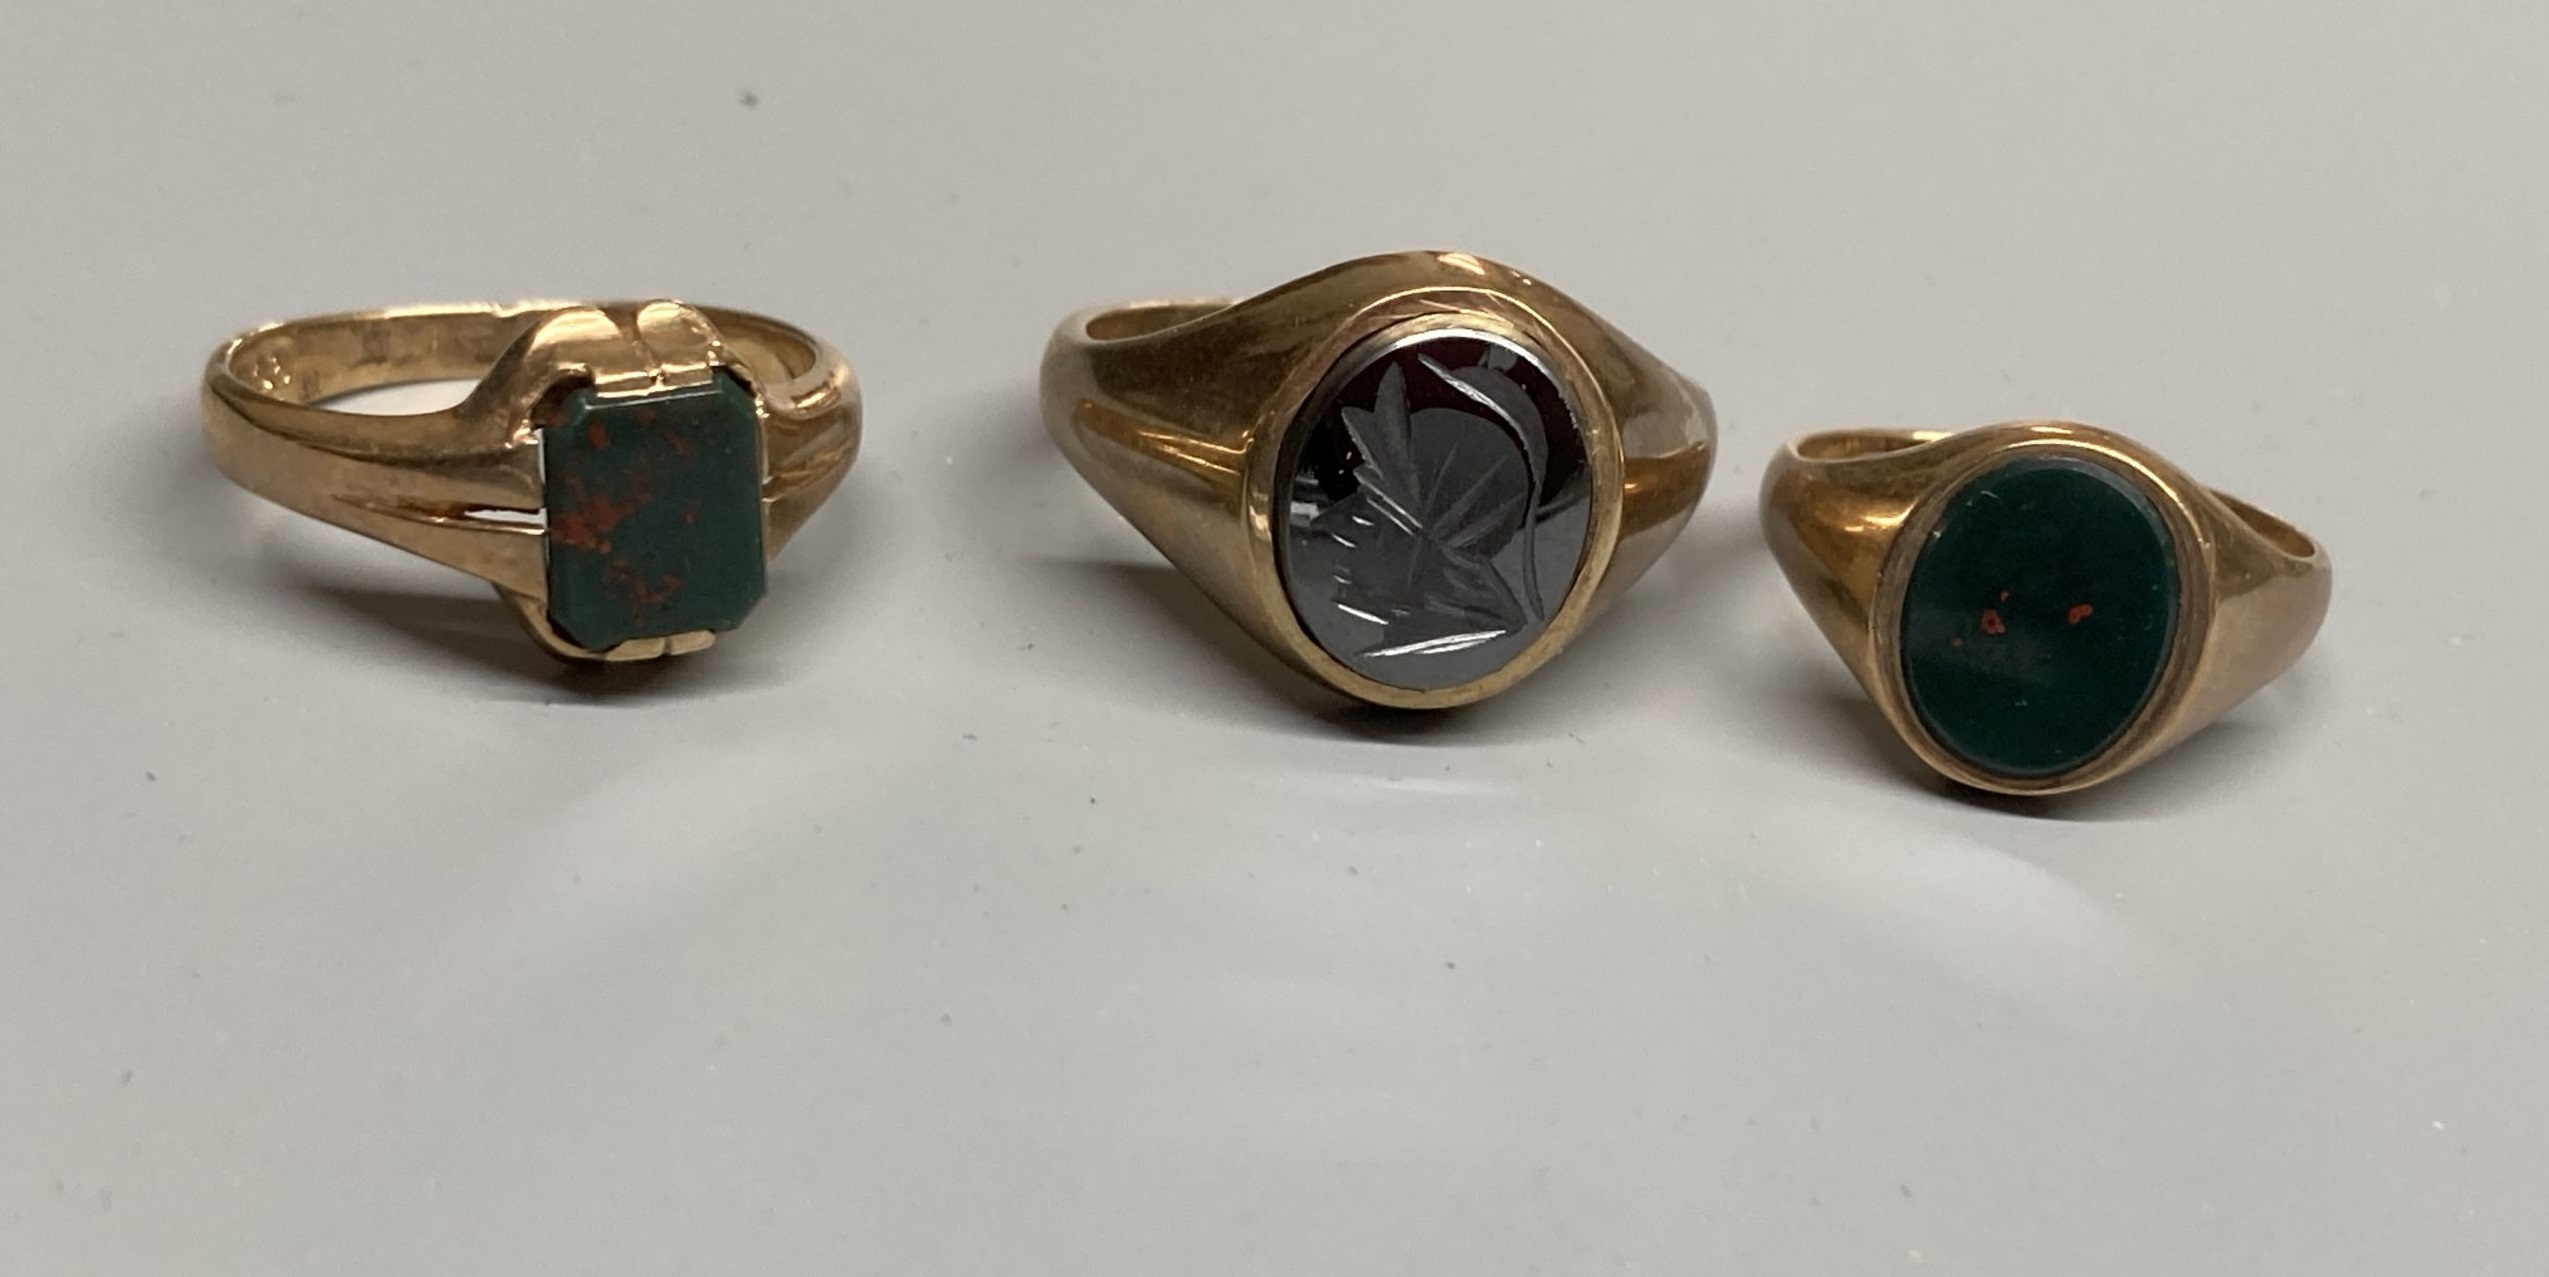 Two modern 9ct gold and bloodstone set signet rings, sizes M & T and a 9ct gold and hematite ring, size S/T